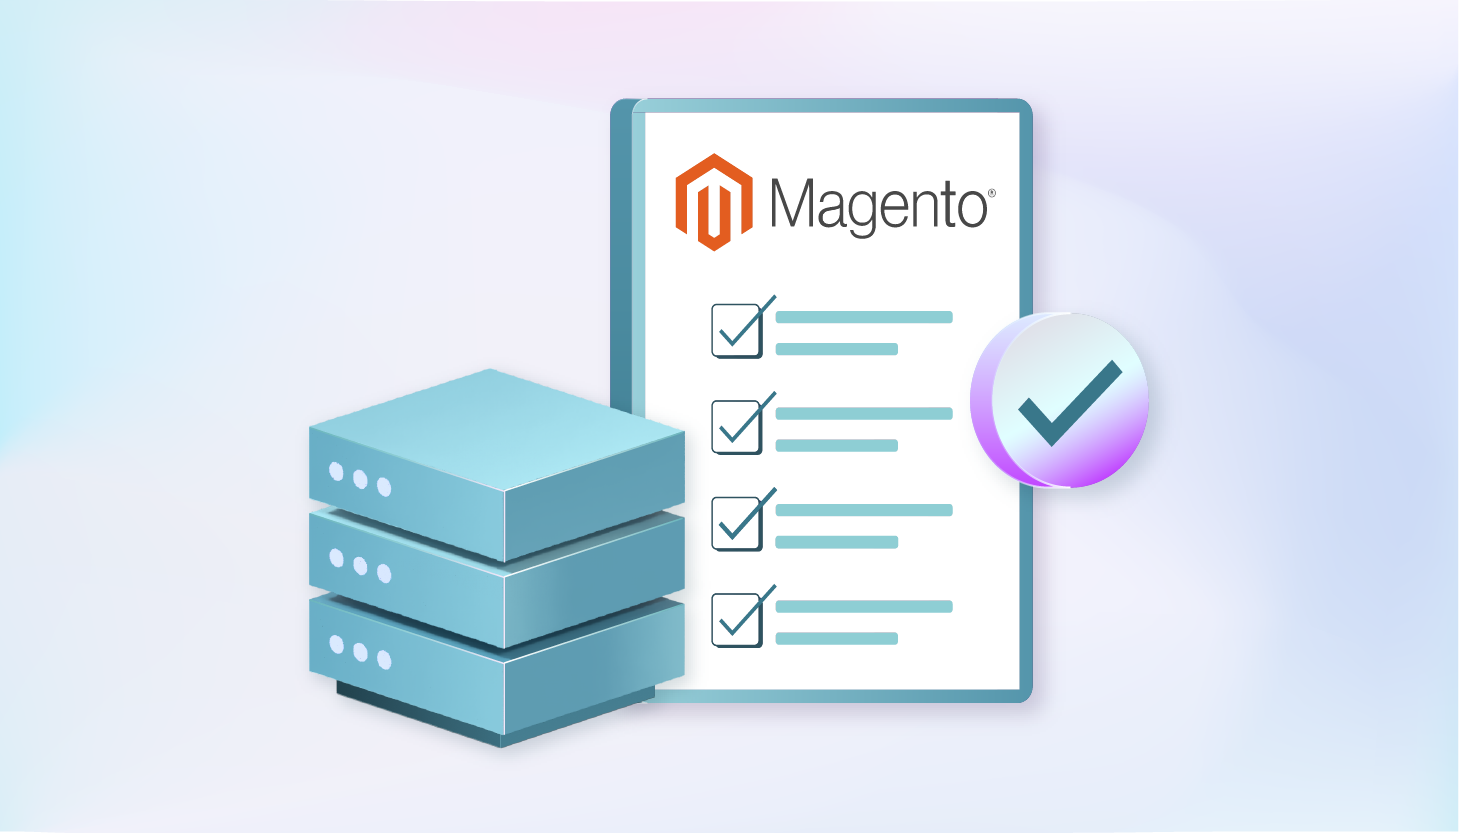 Hosting Requirements for Magento: Meet the Technical Specifications